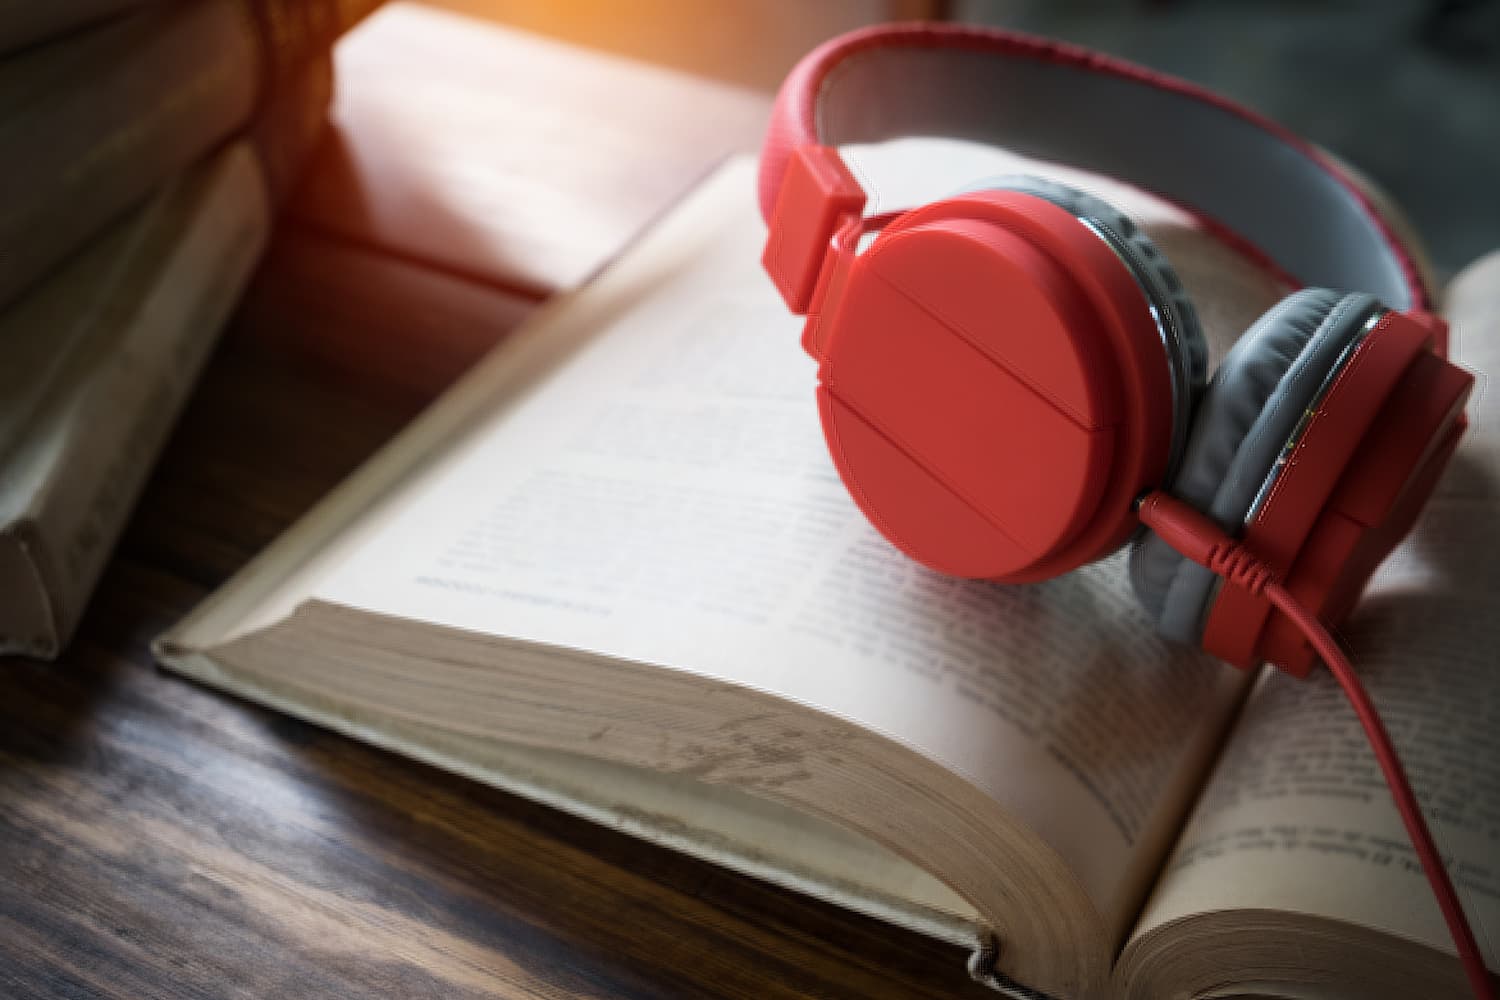 audiobook books table with headphones